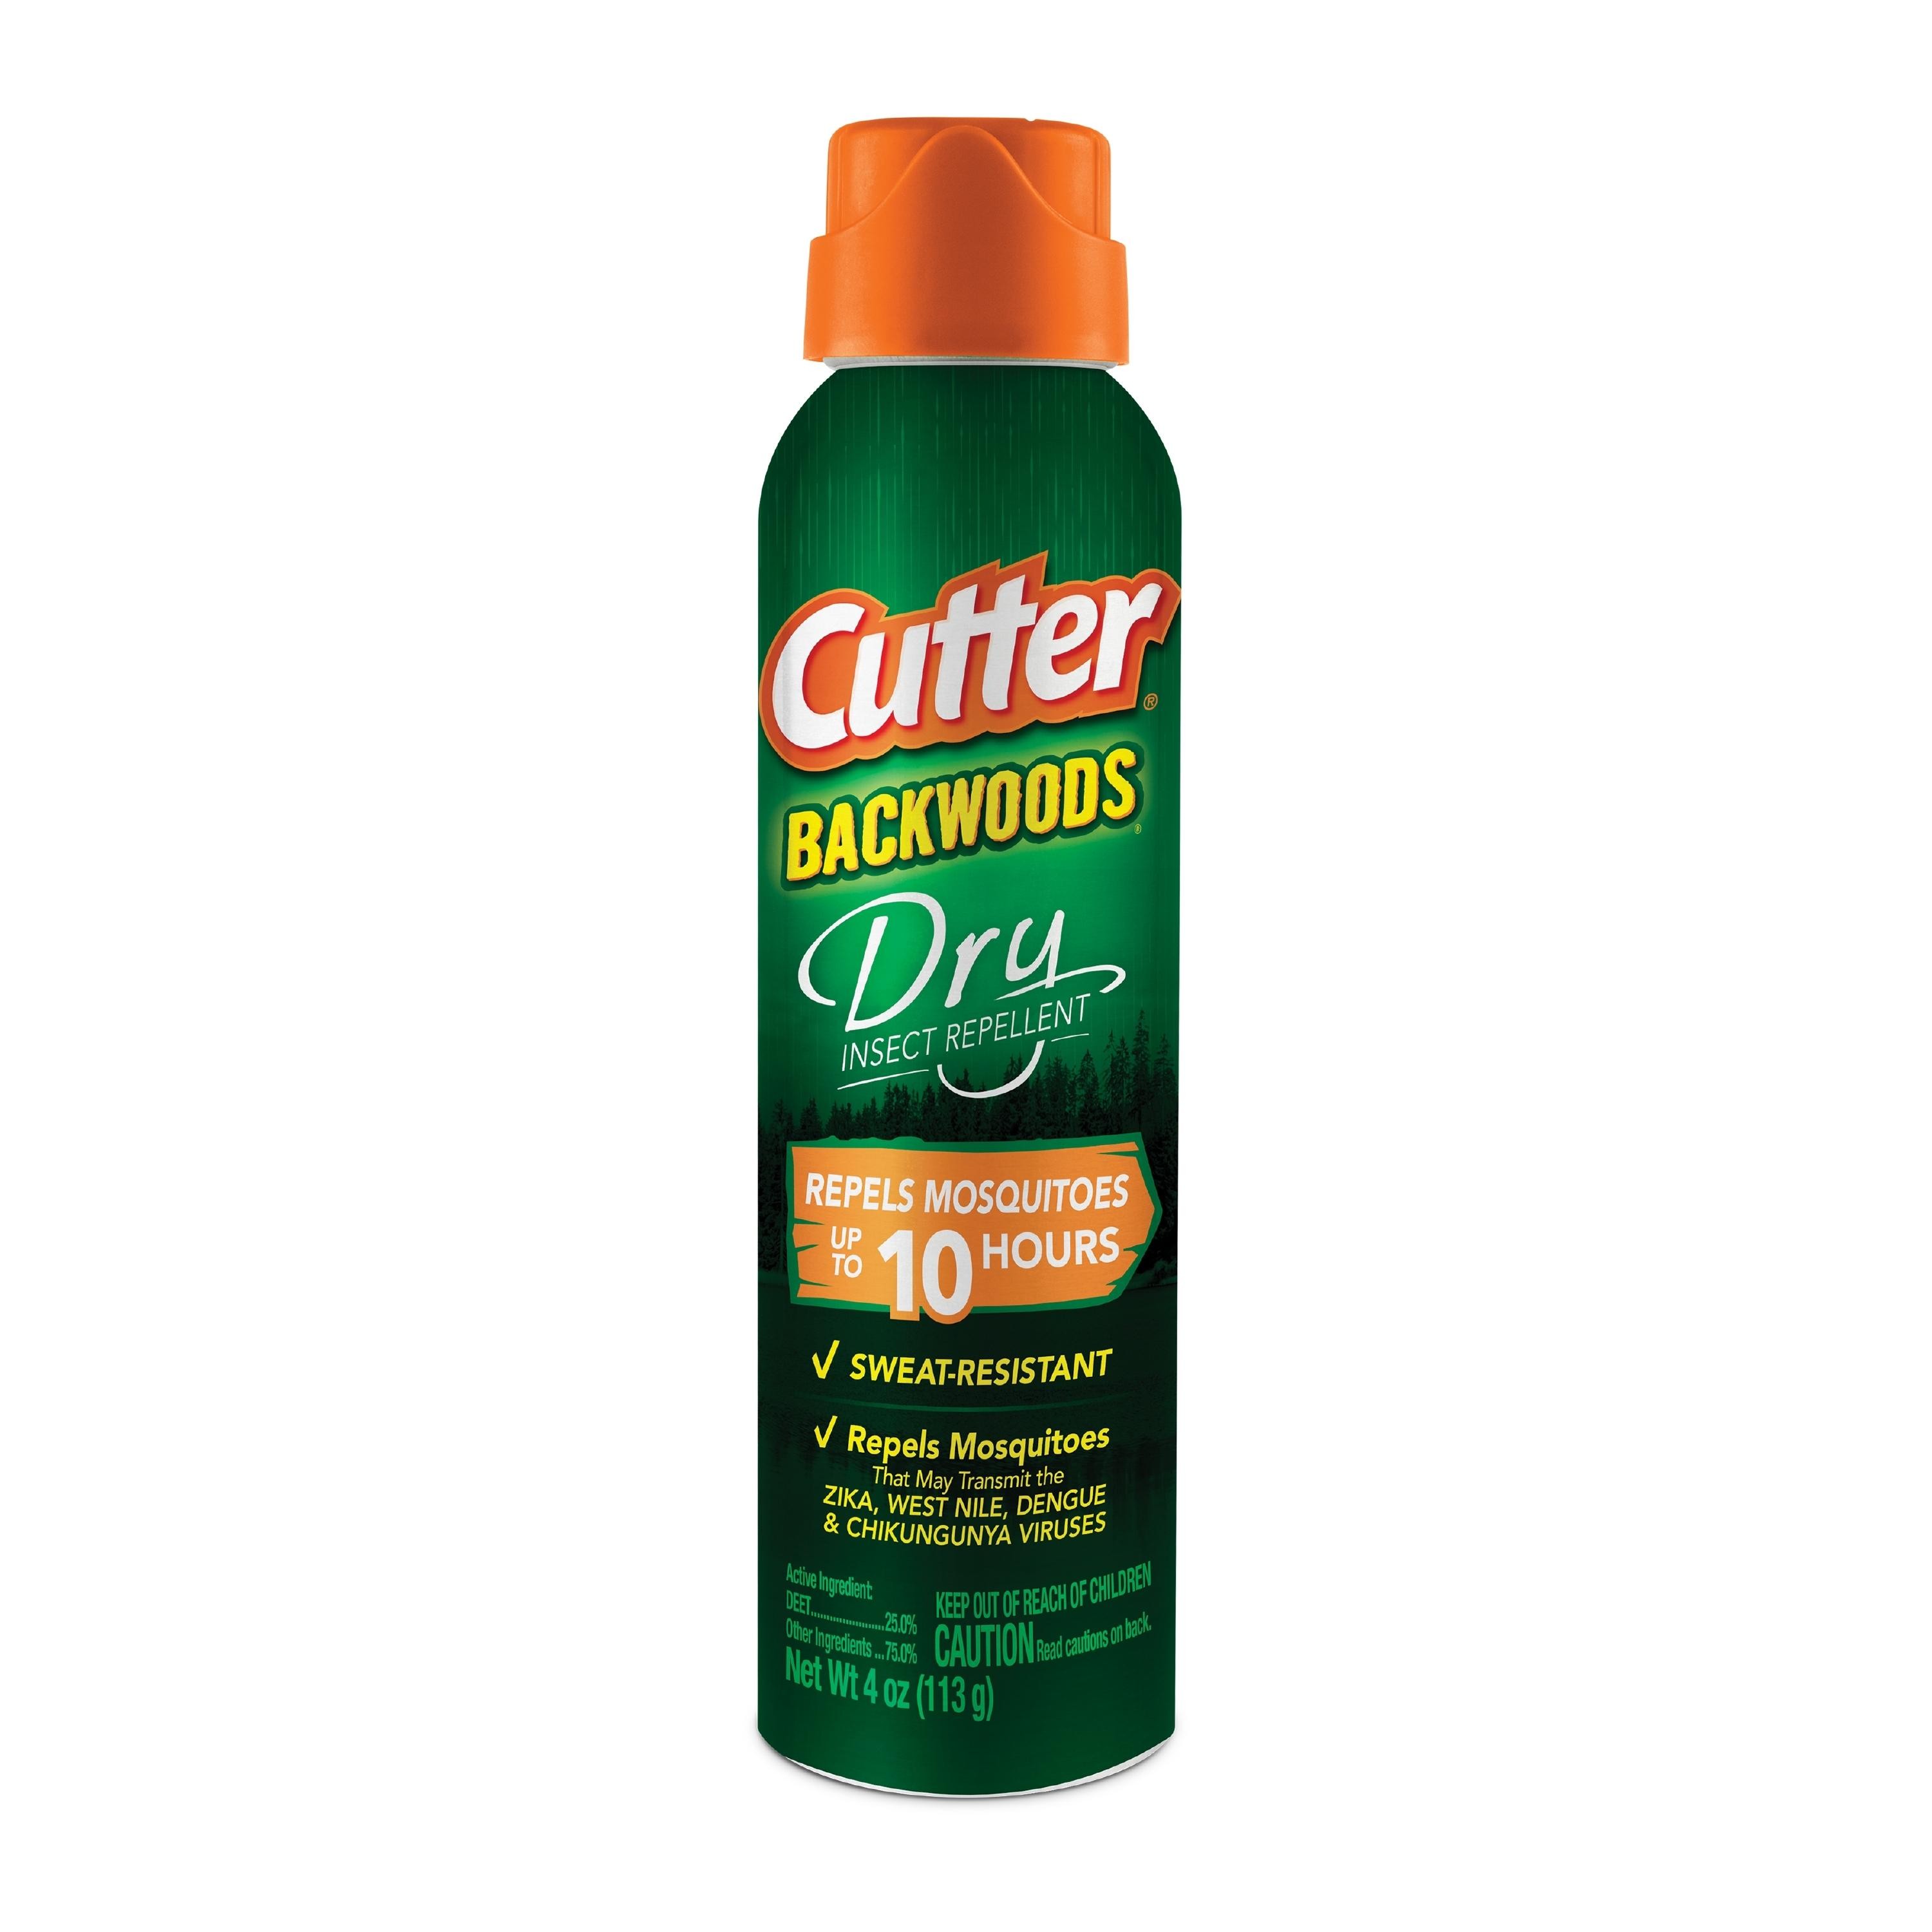 Cutter Backwoods Dry Insect Aerosol Repellent  4 Oz.